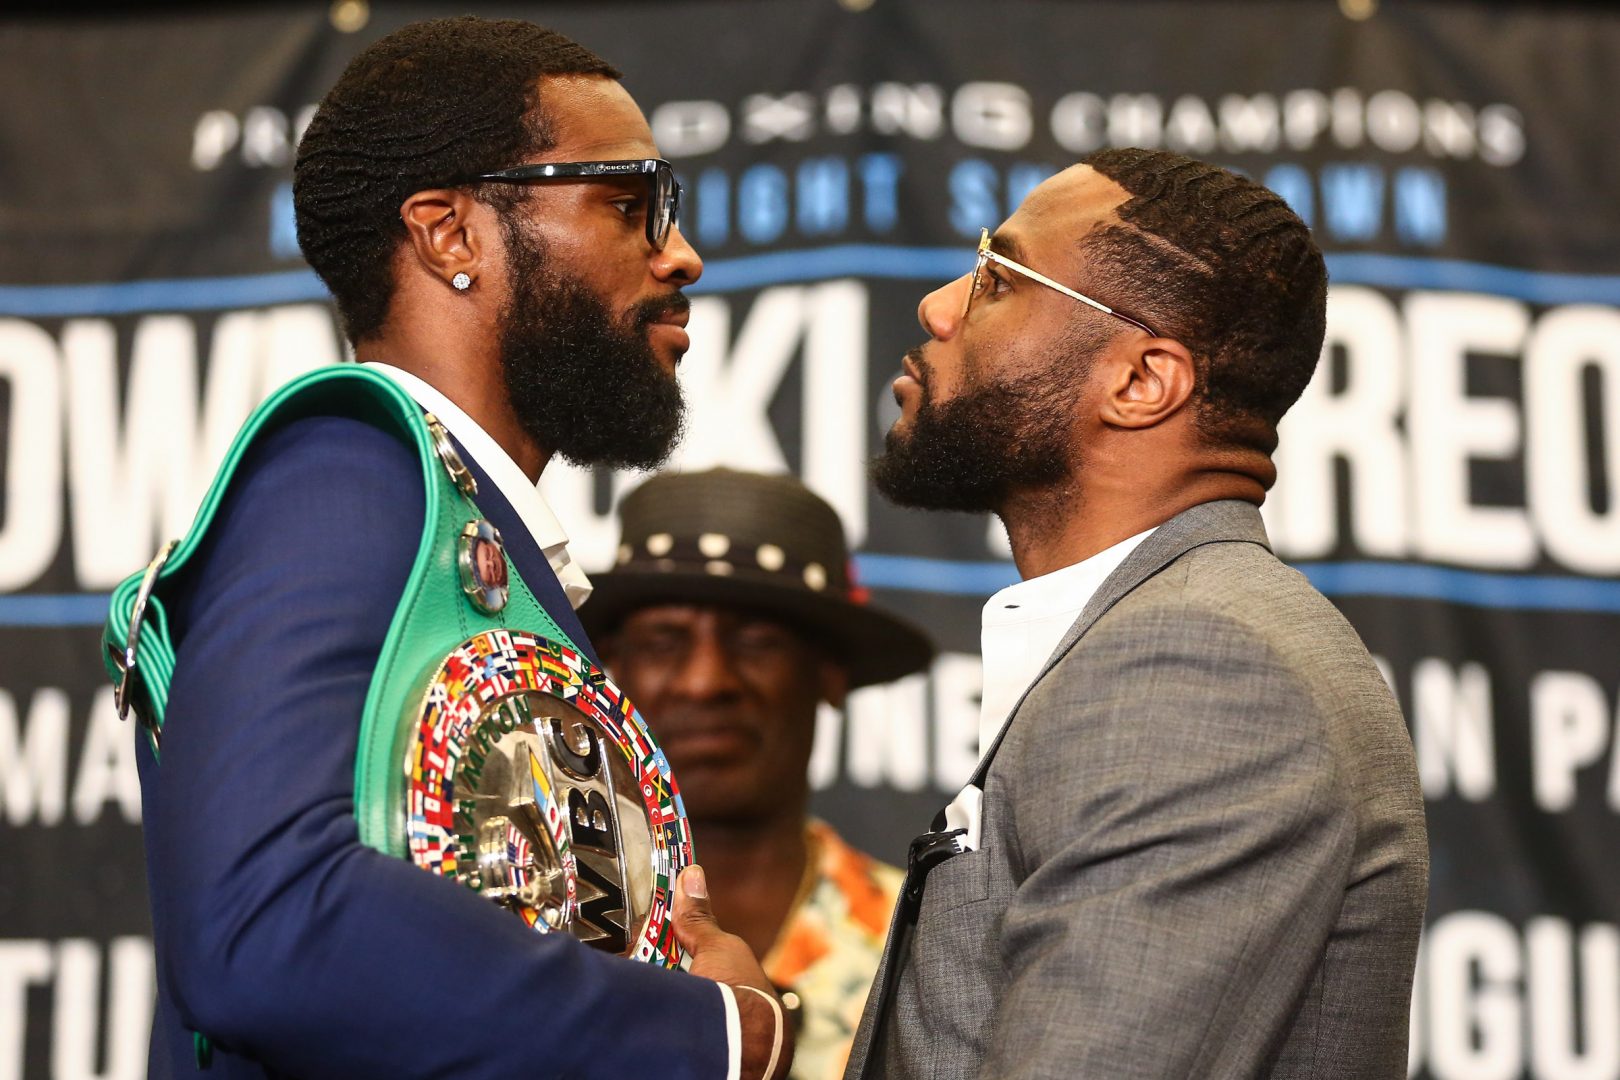 Marcus Browne and Jean Pascal battle for the interim WBA Light Heavyweight title. (Photo by Stephanie Trapp/TGB Promotions)